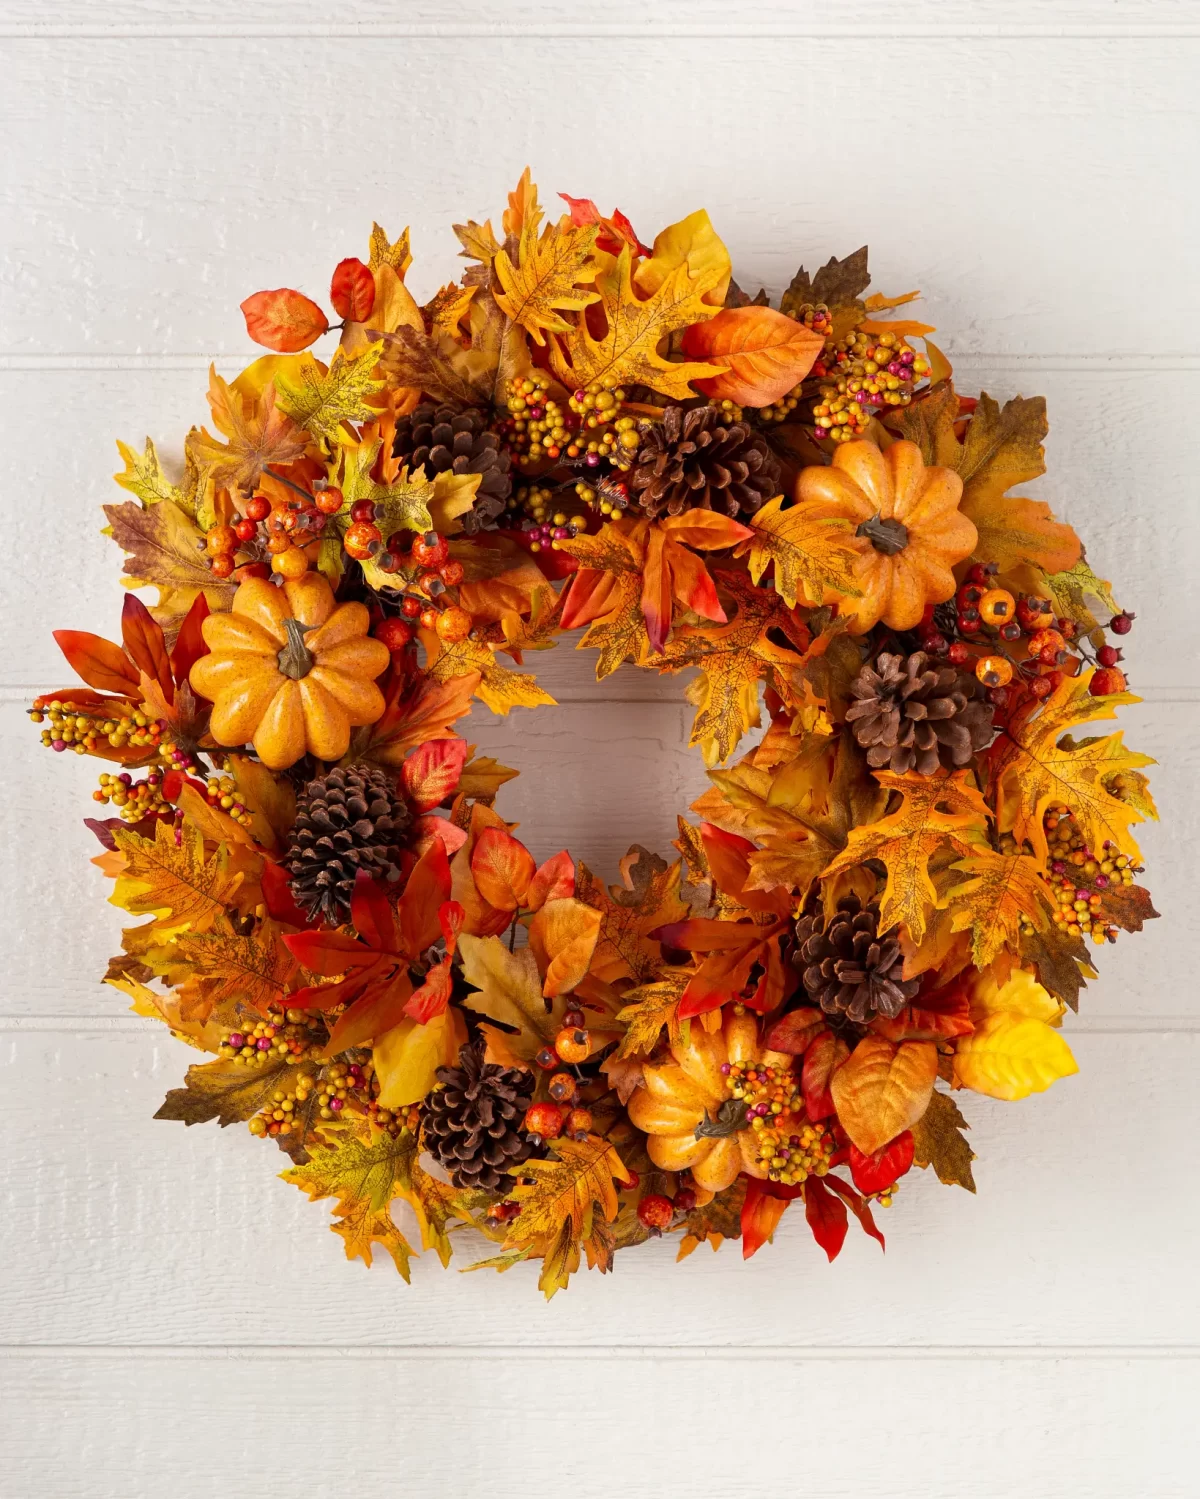 Fall Decorating Ideas: 17 Amazing Additions To Your Seasonal Home Decor You’ll Love